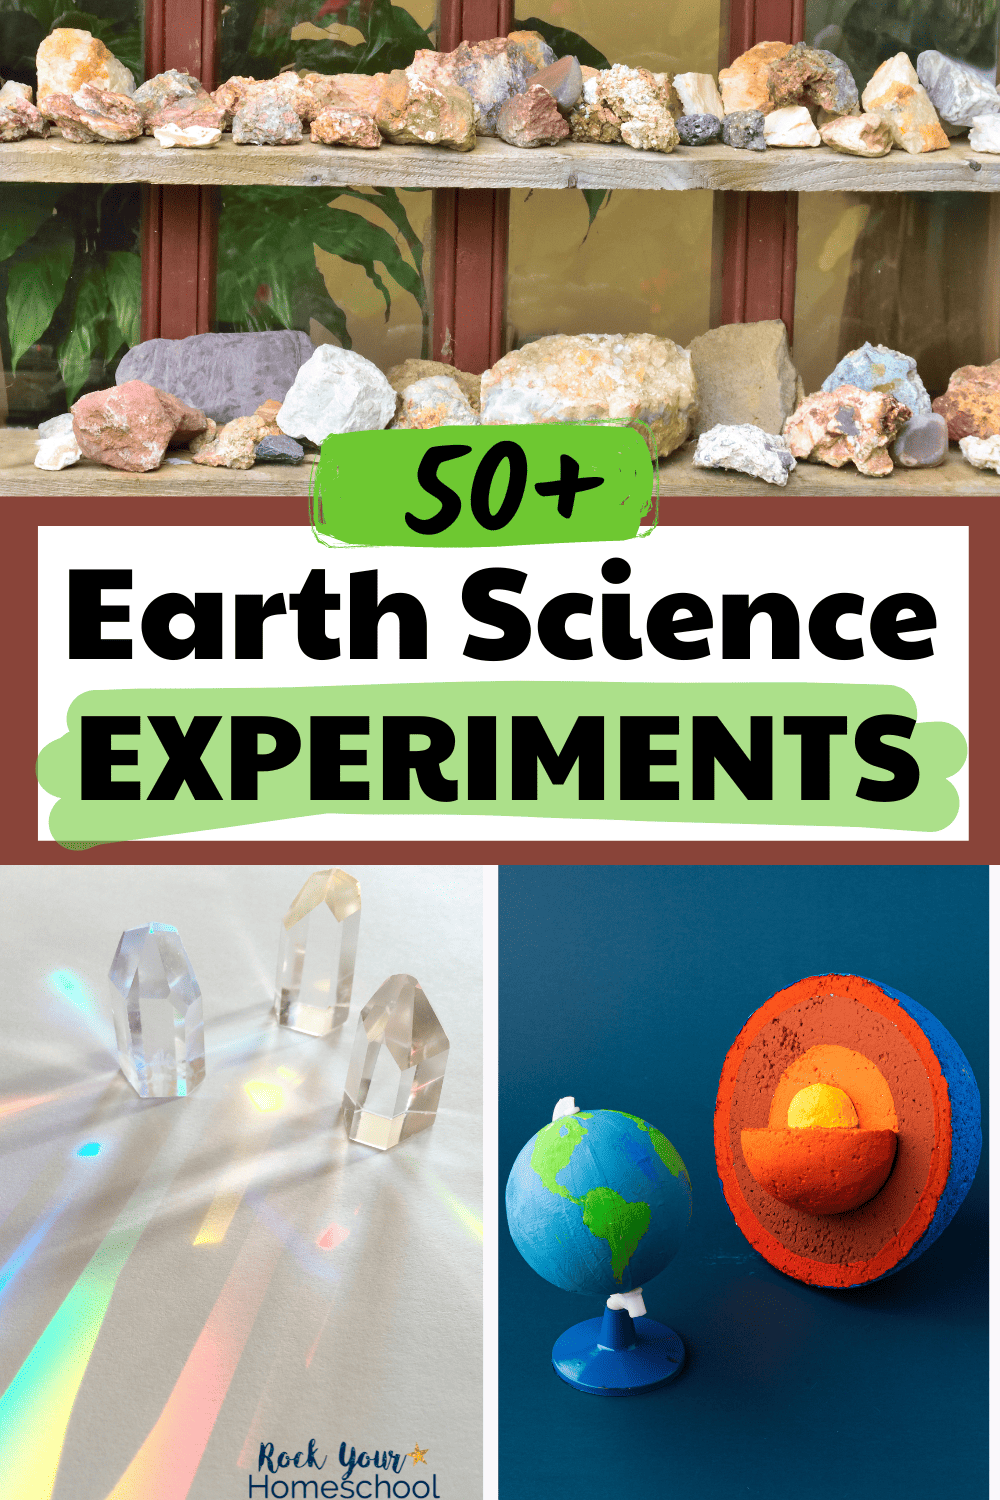 Rock collection, rainbows from prisms, and foam glove and sun as examples of these 50+ earth science experiments